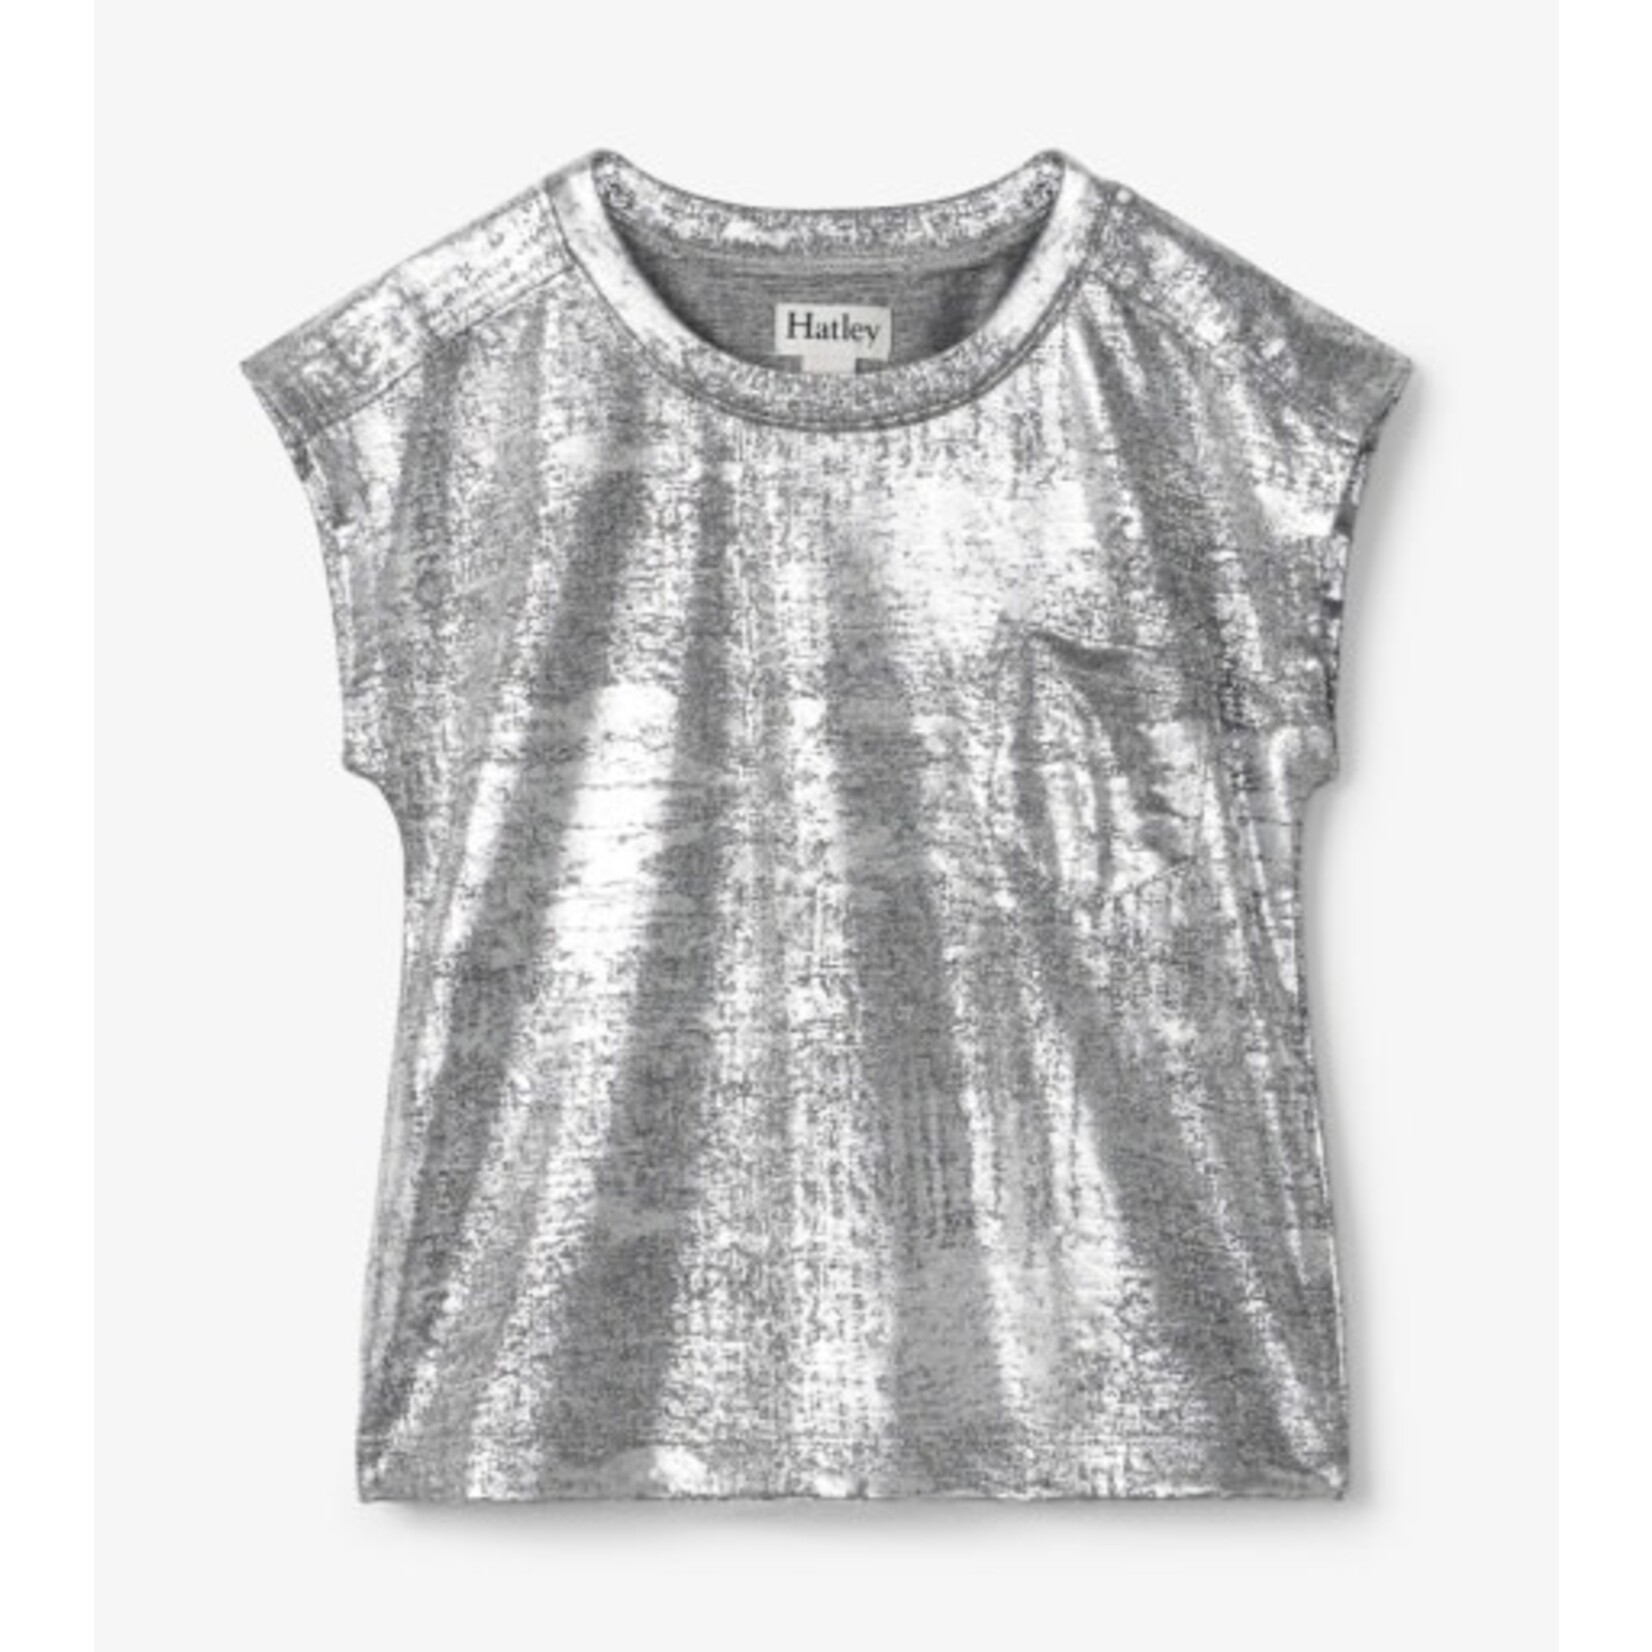 Hatley Kids silver shimmer relaxed tee